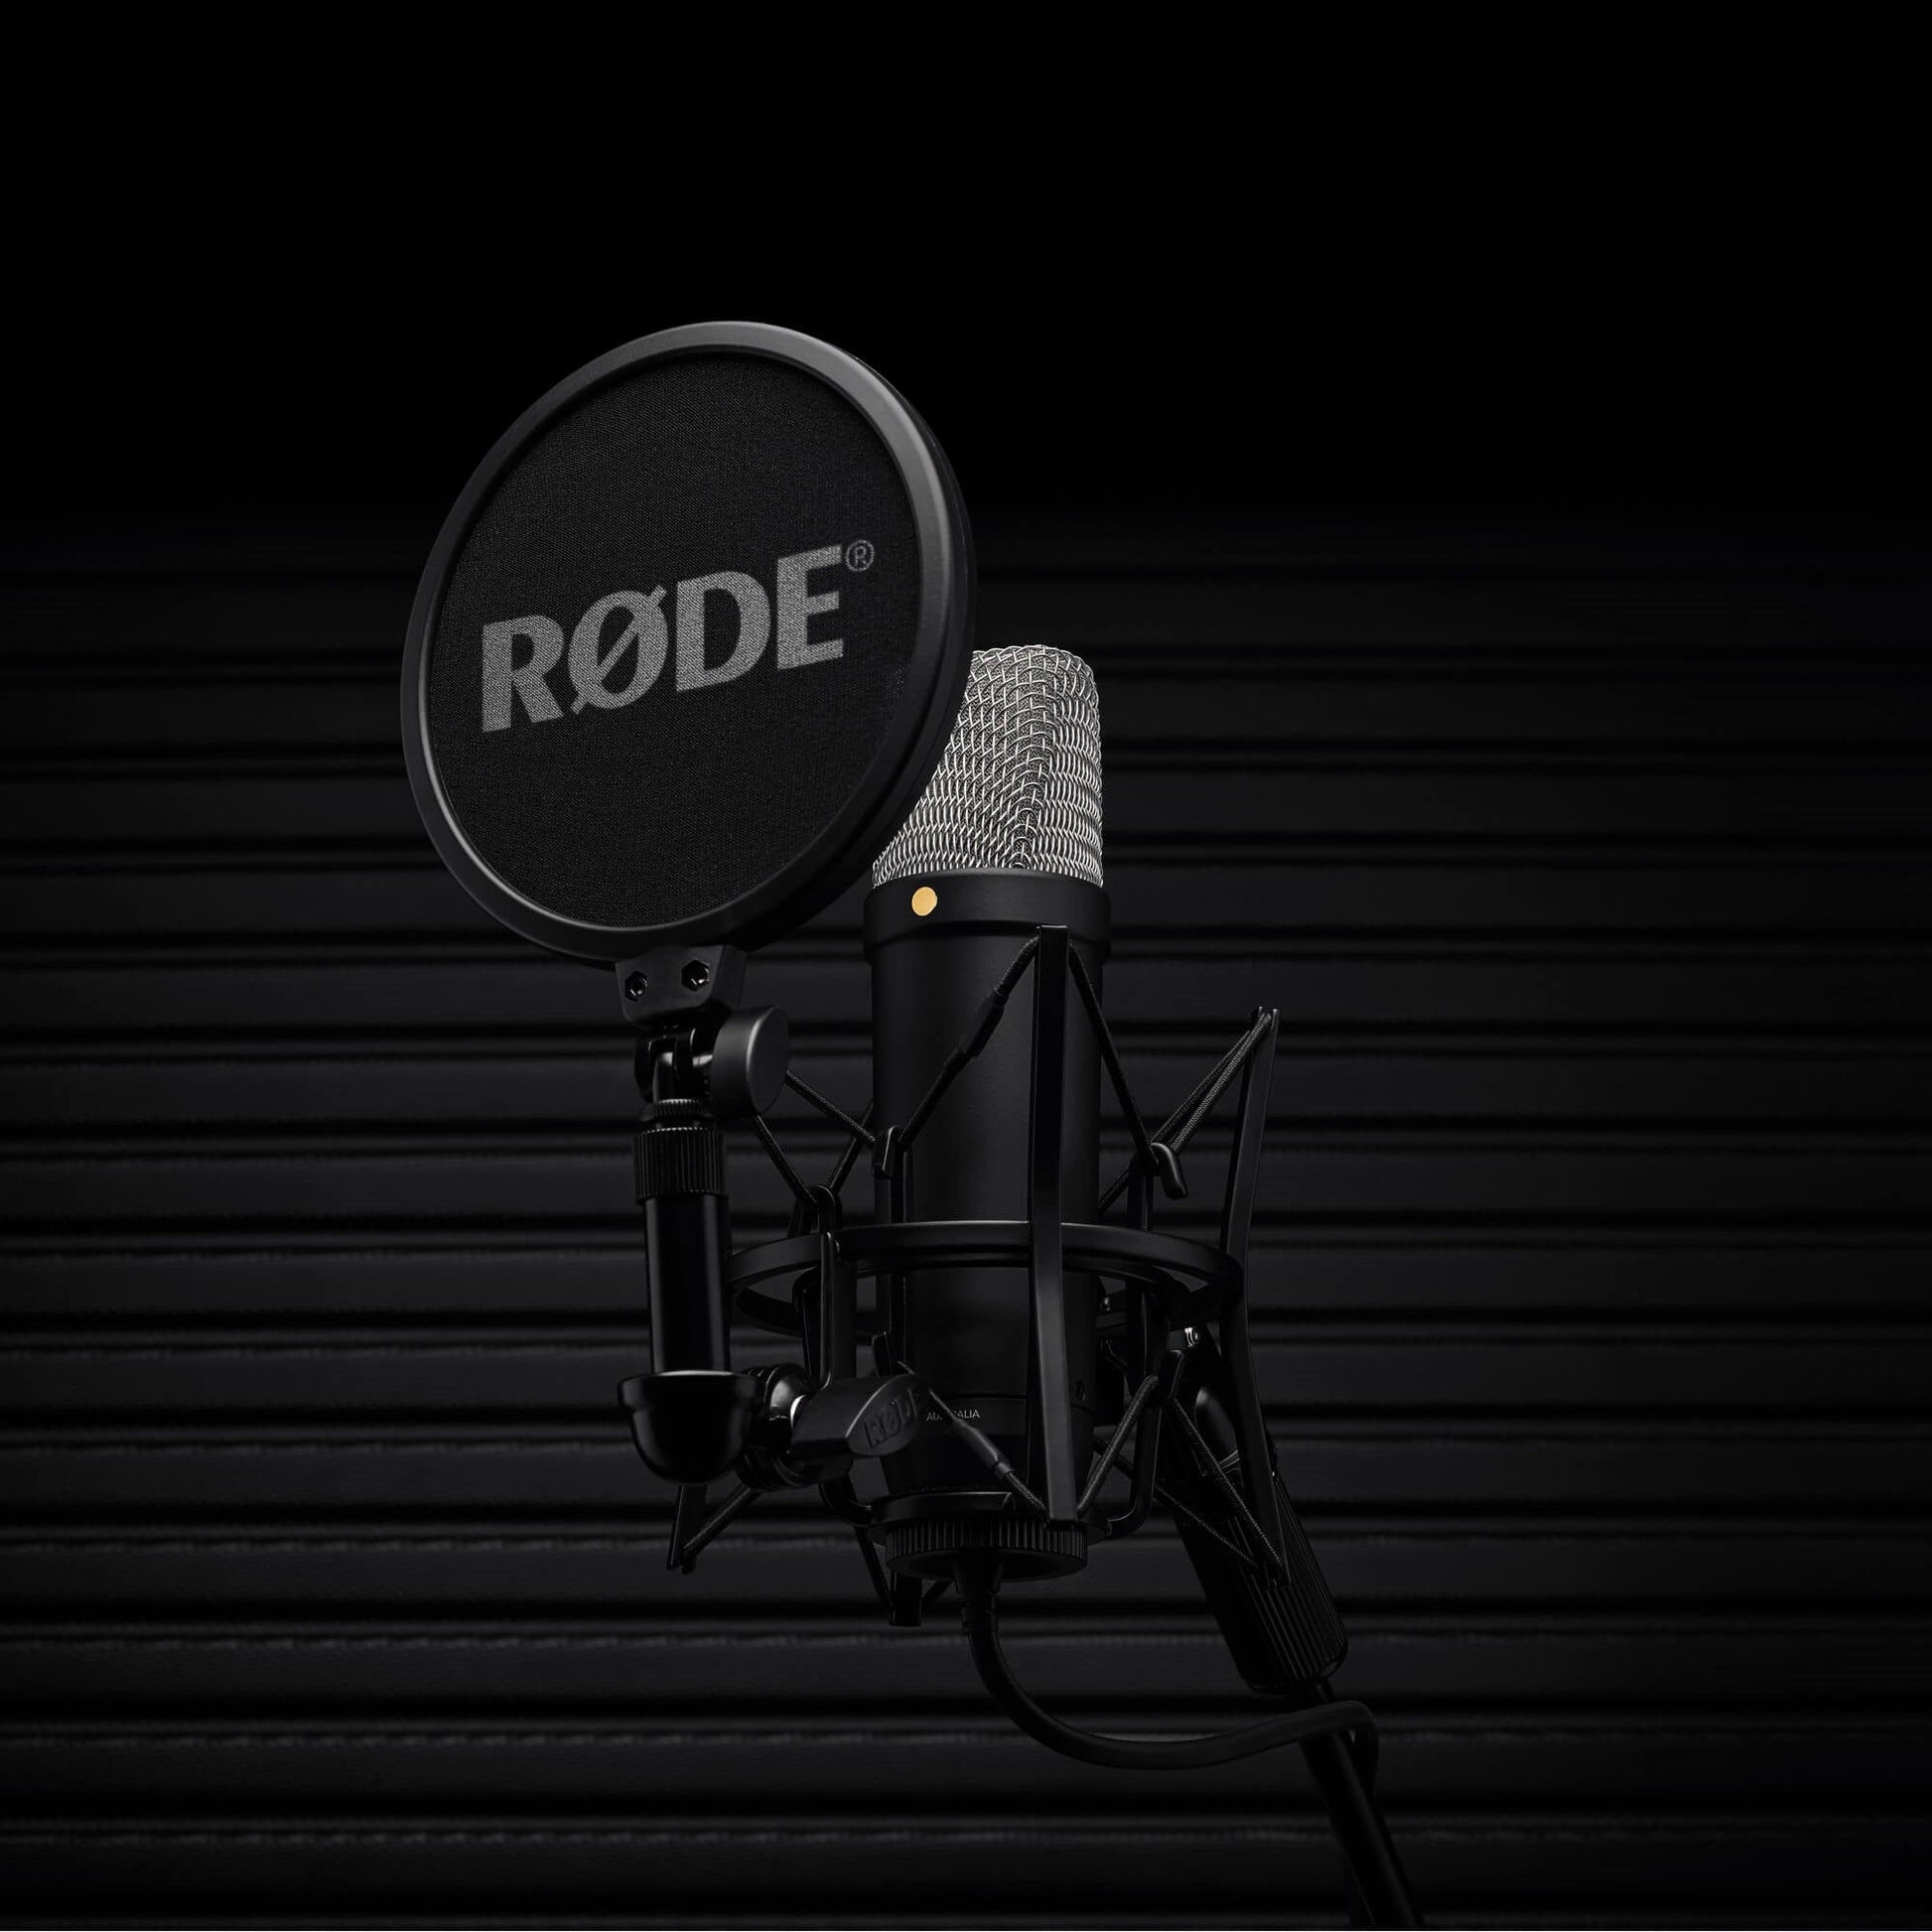 My Review of The RØDE NT1 5th Generation Microphone